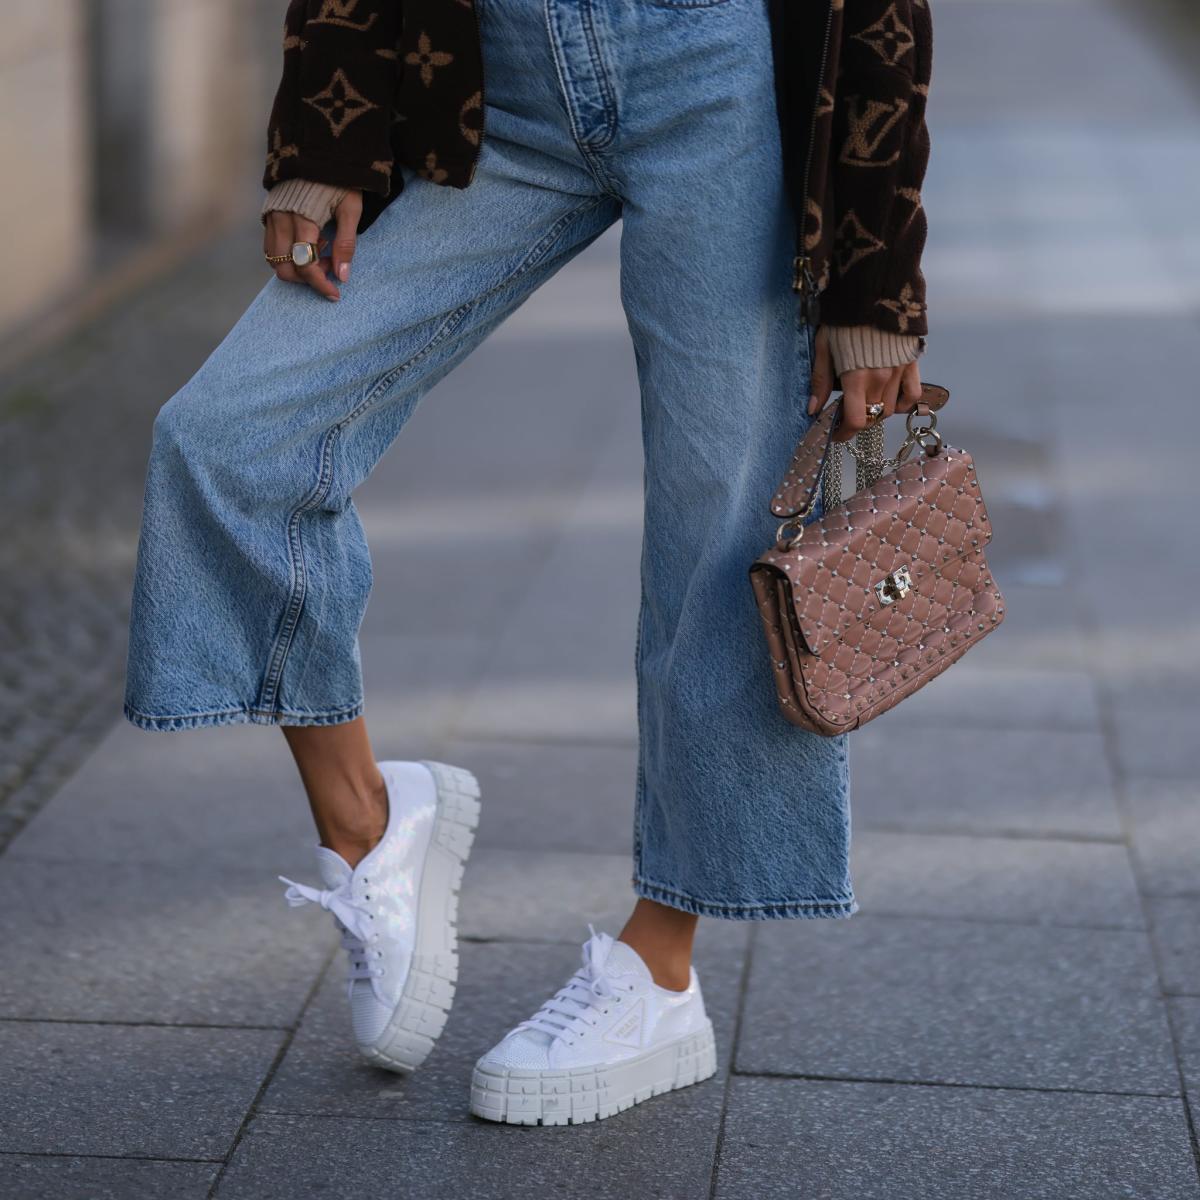 Platform Sneakers Are Making a Comeback - Shop Our Favorites